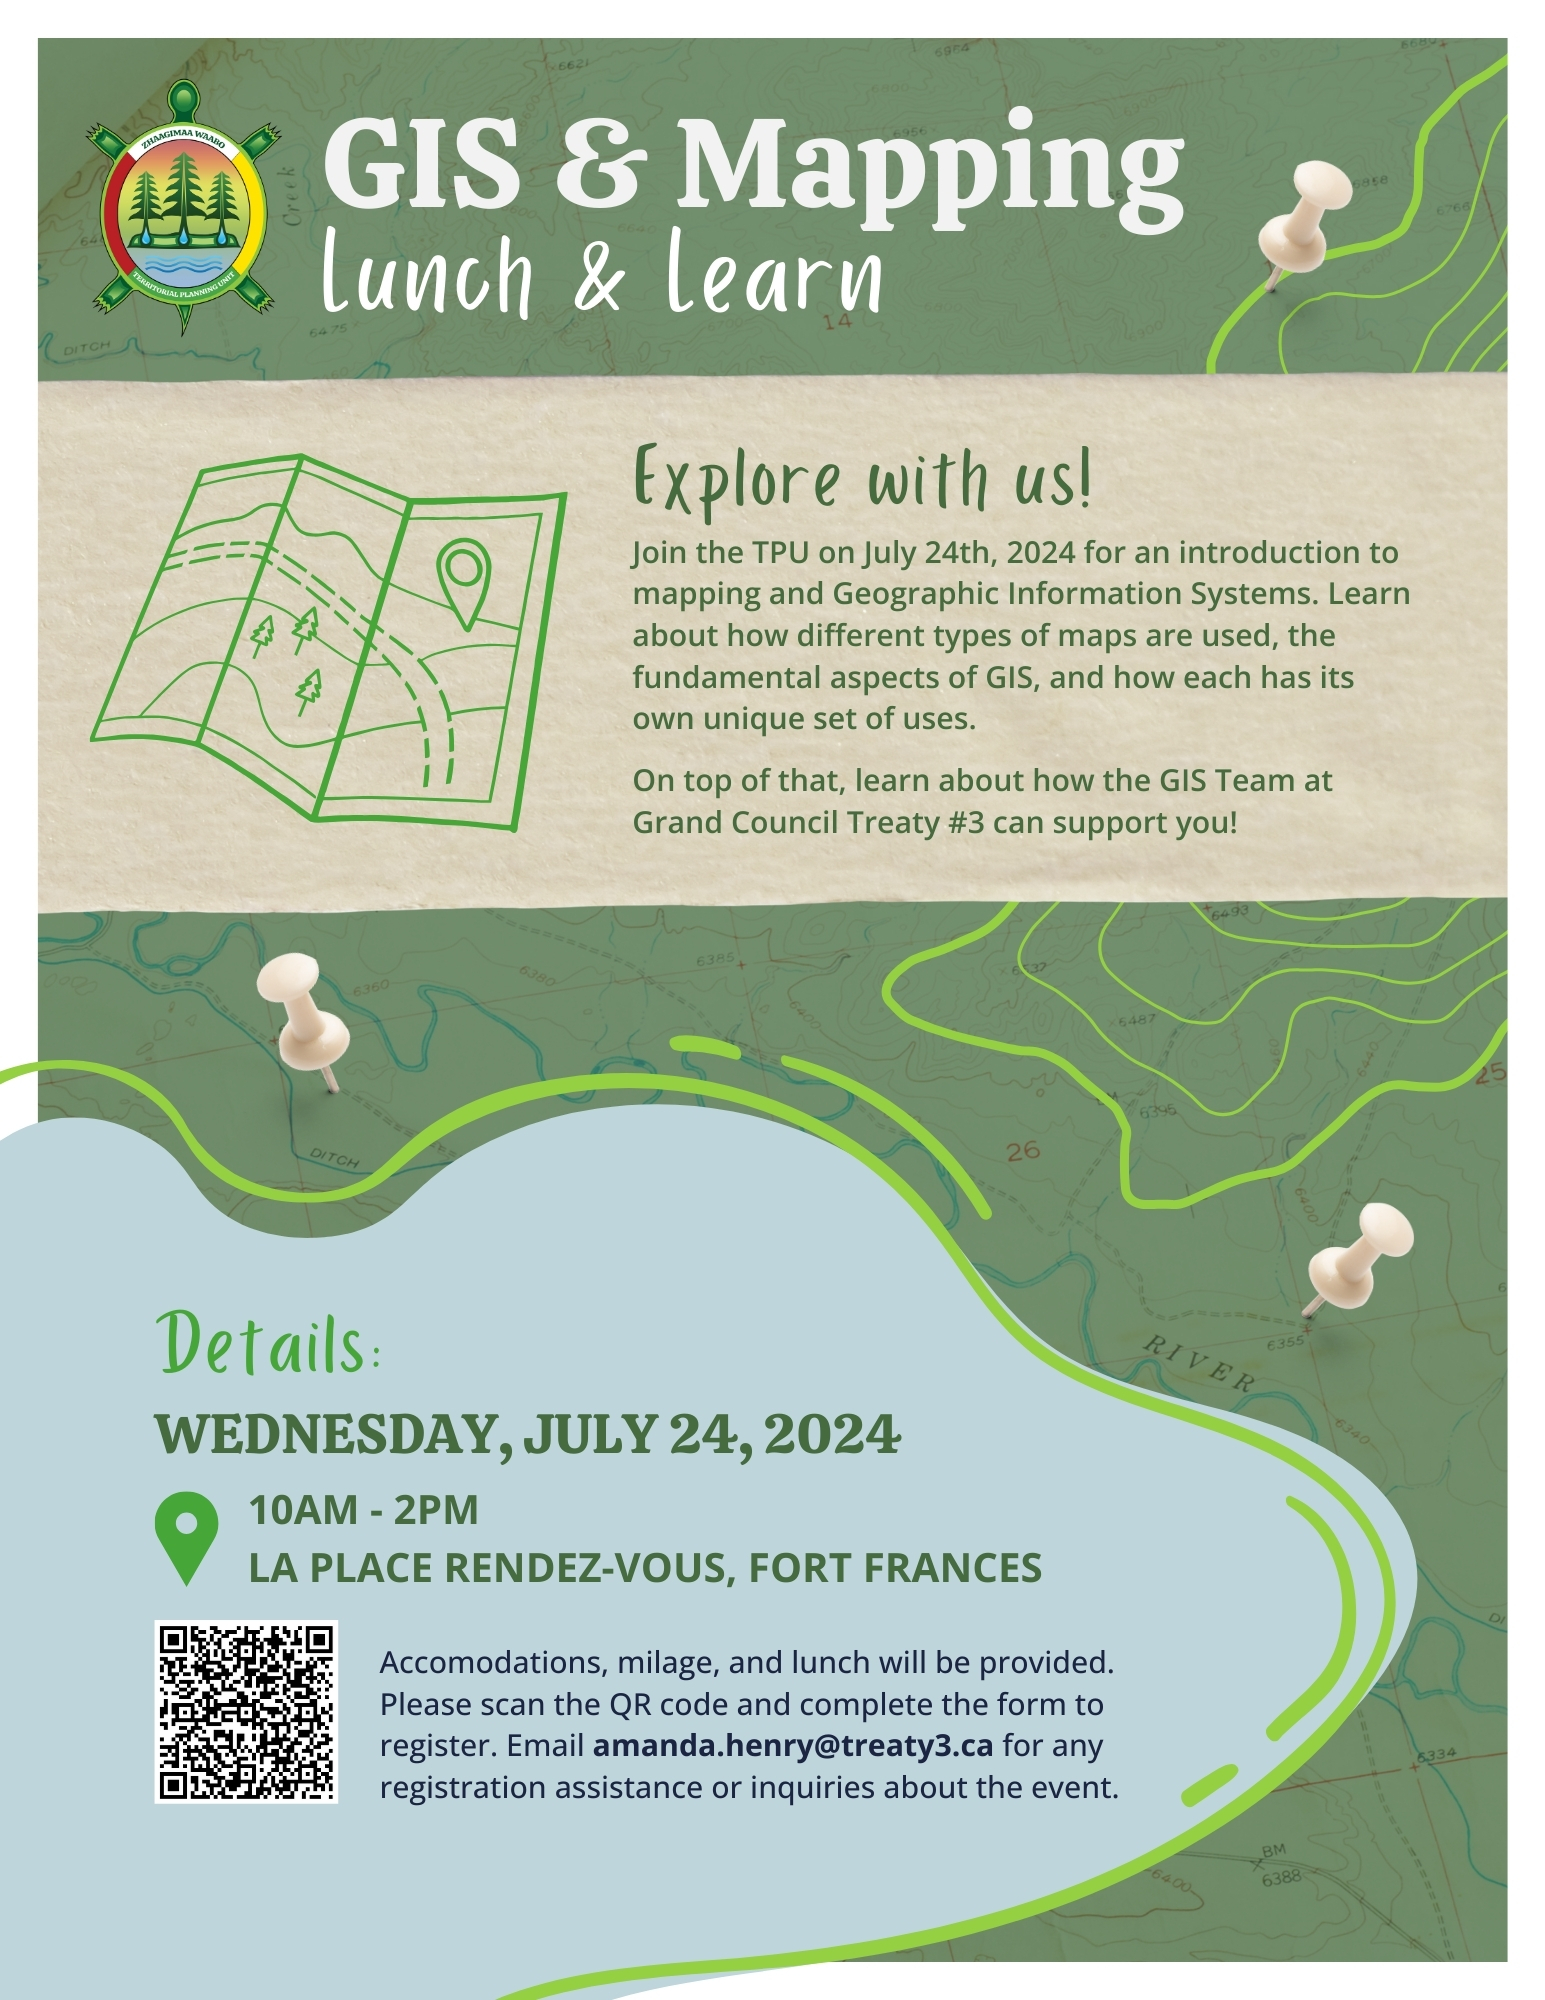 GIS & Mapping Lunch & Learn